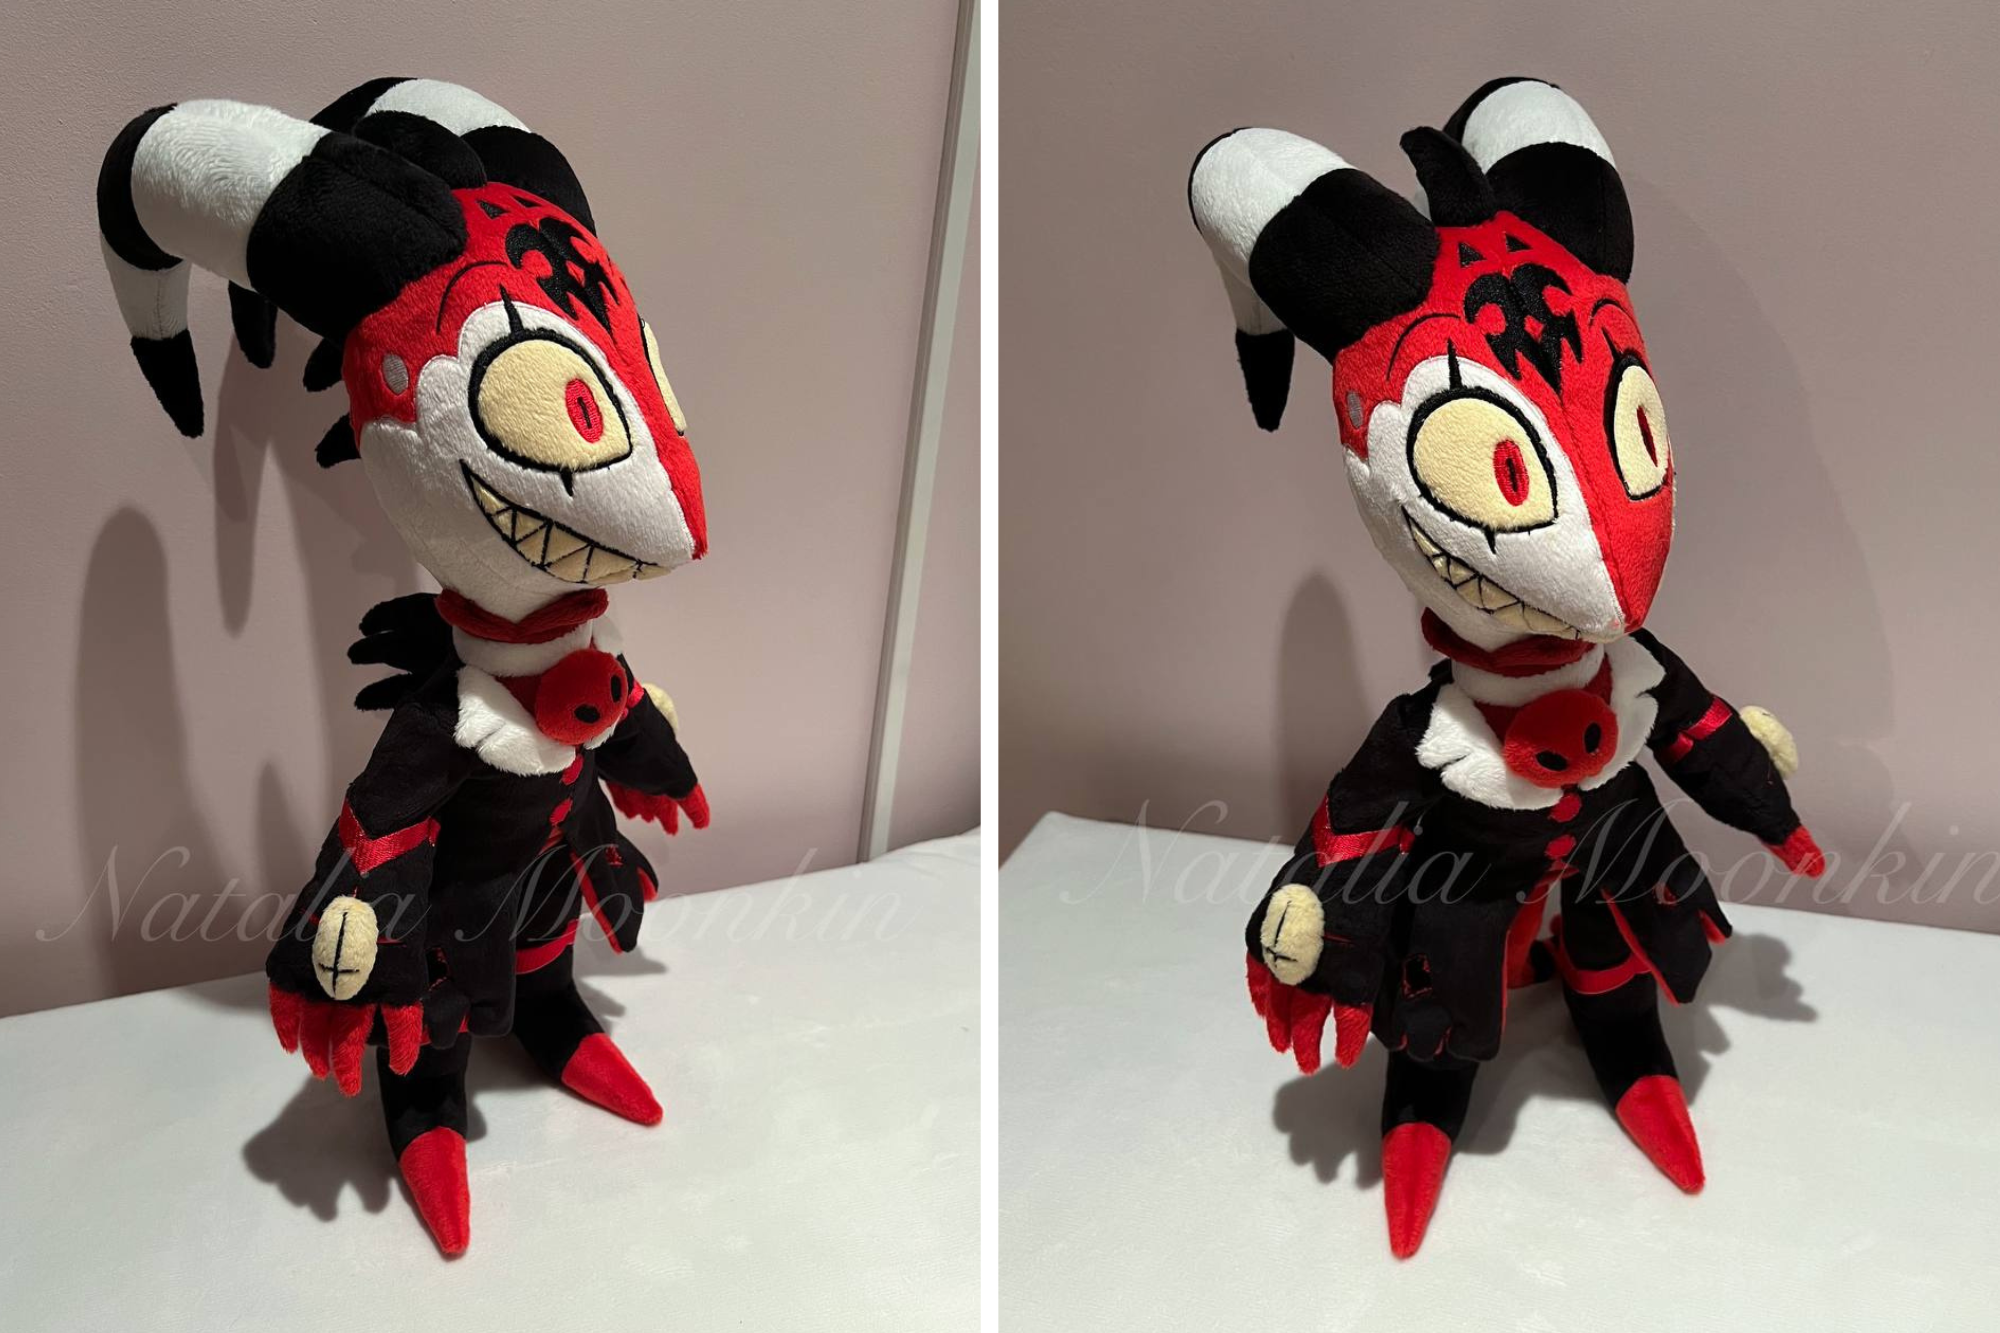 Blitzo from Helluva plushie by Fur [dot] net